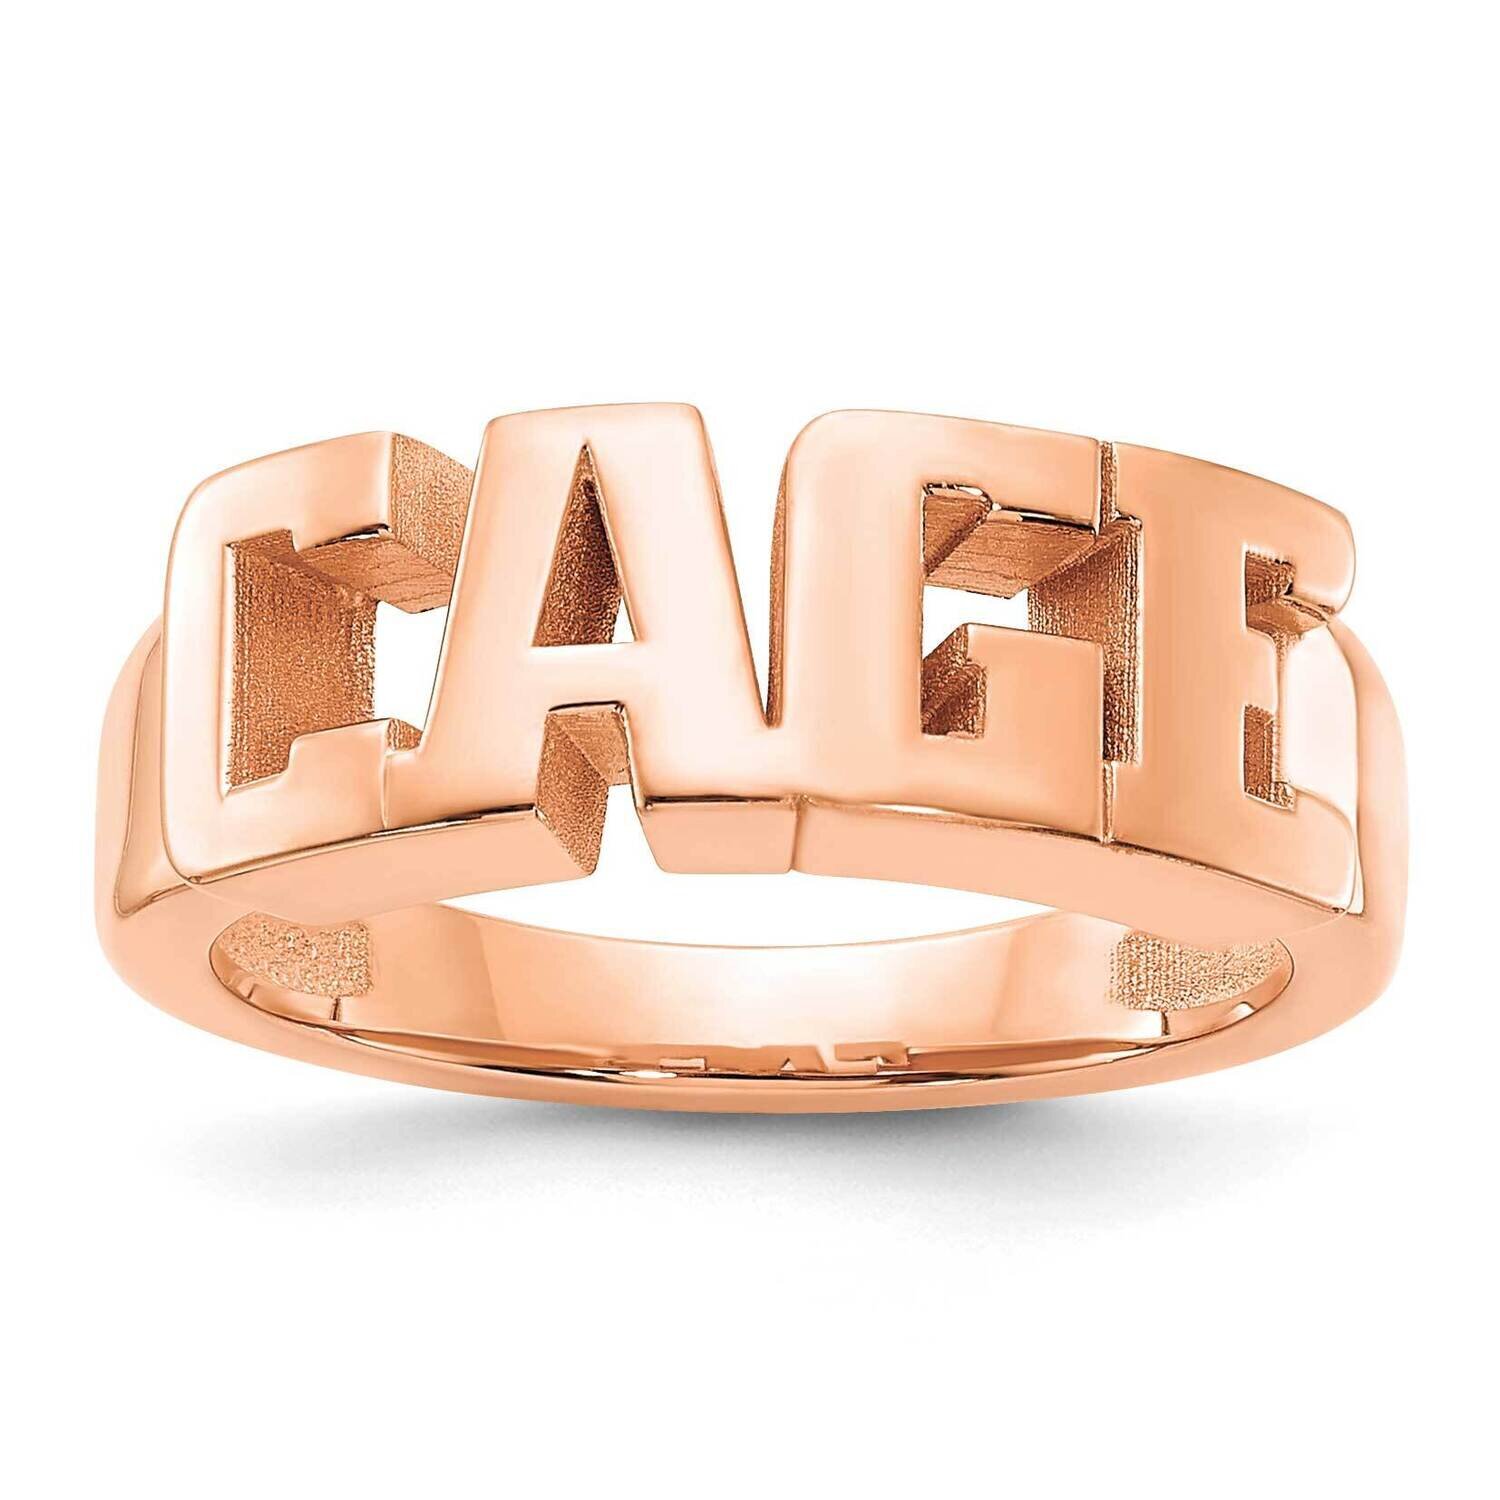 Personalized Name Ring 14k Rose Gold Polished XNR54R